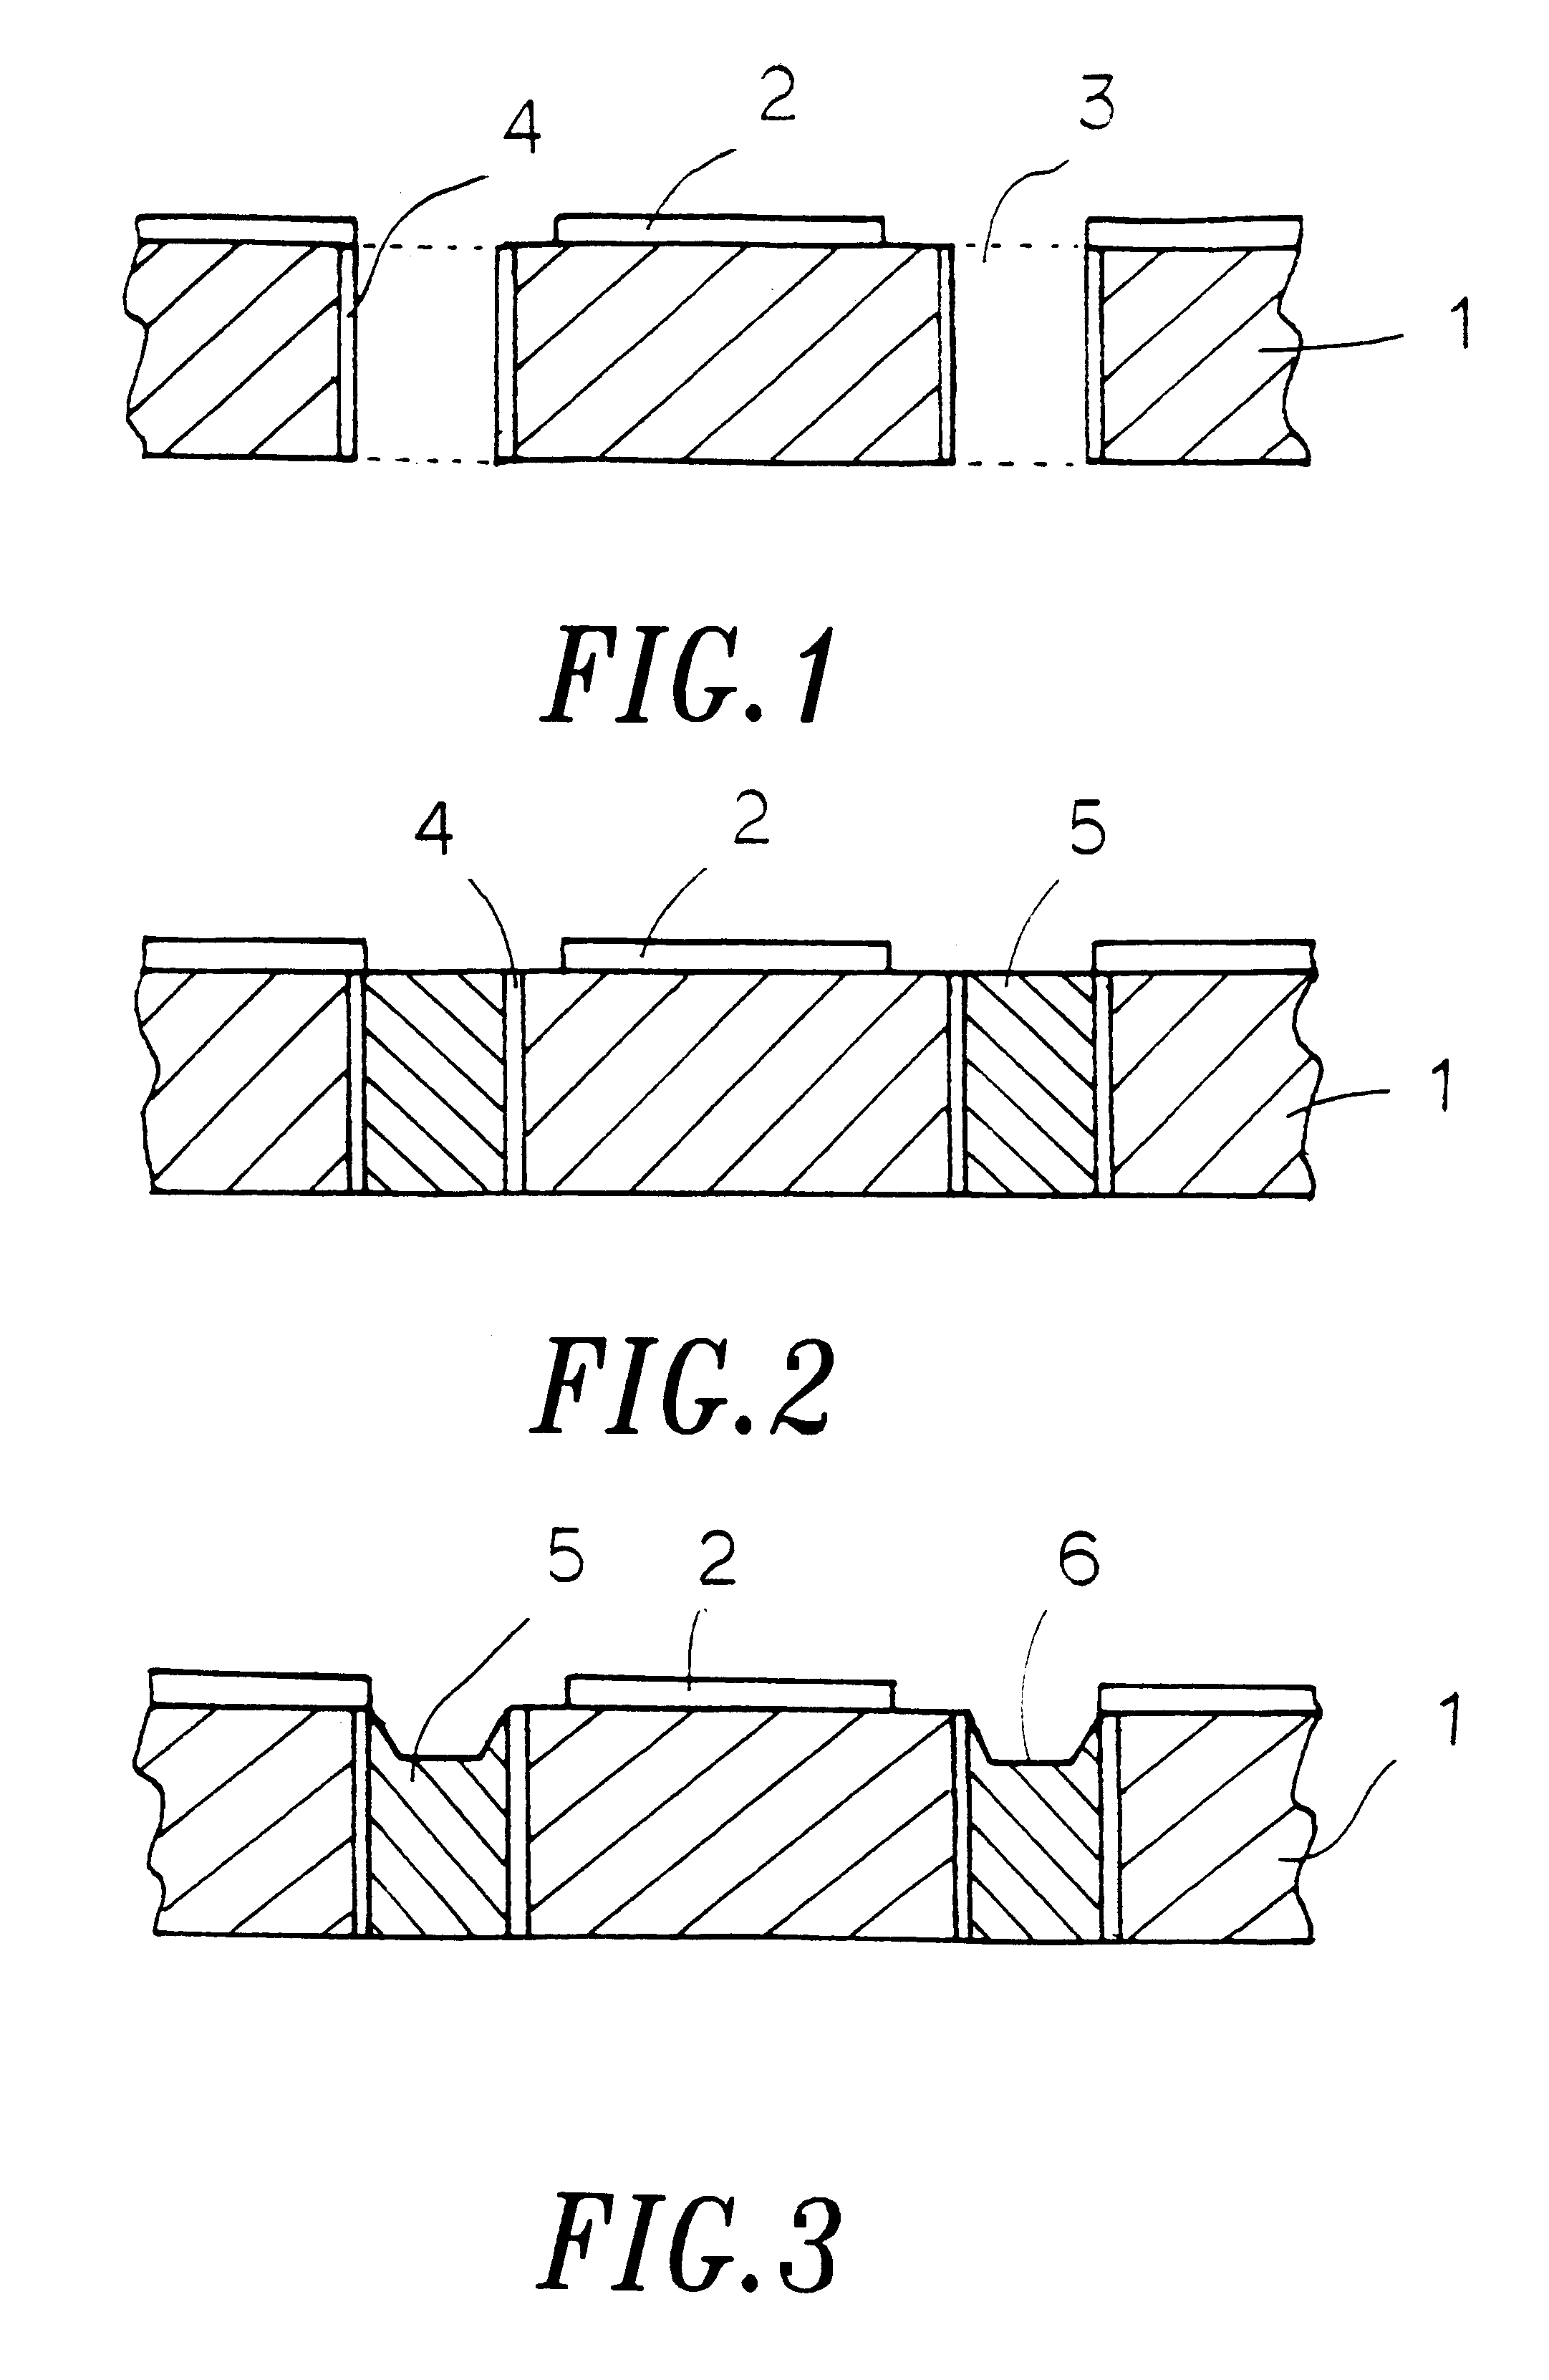 Packaging types of light-emitting diode